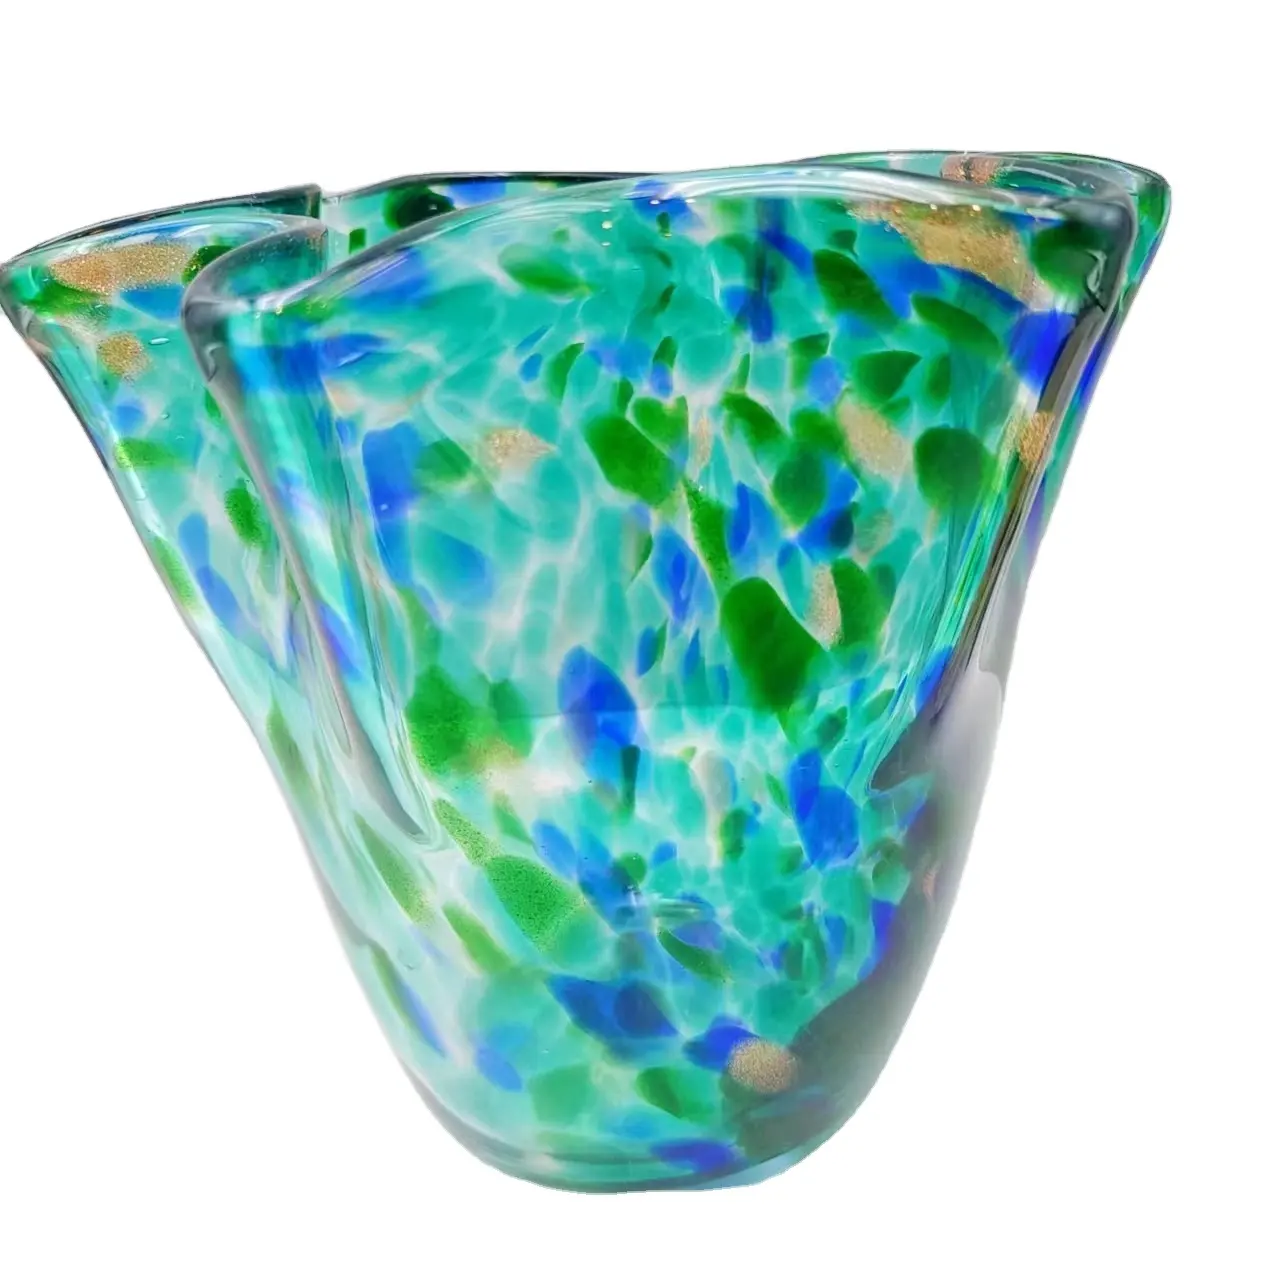 Bowl Home Office Tabletop Decor Blue Green Glass Vase Design Holiday Gift Give Handmade Murano Glass Fast Shipping New Europe MJ